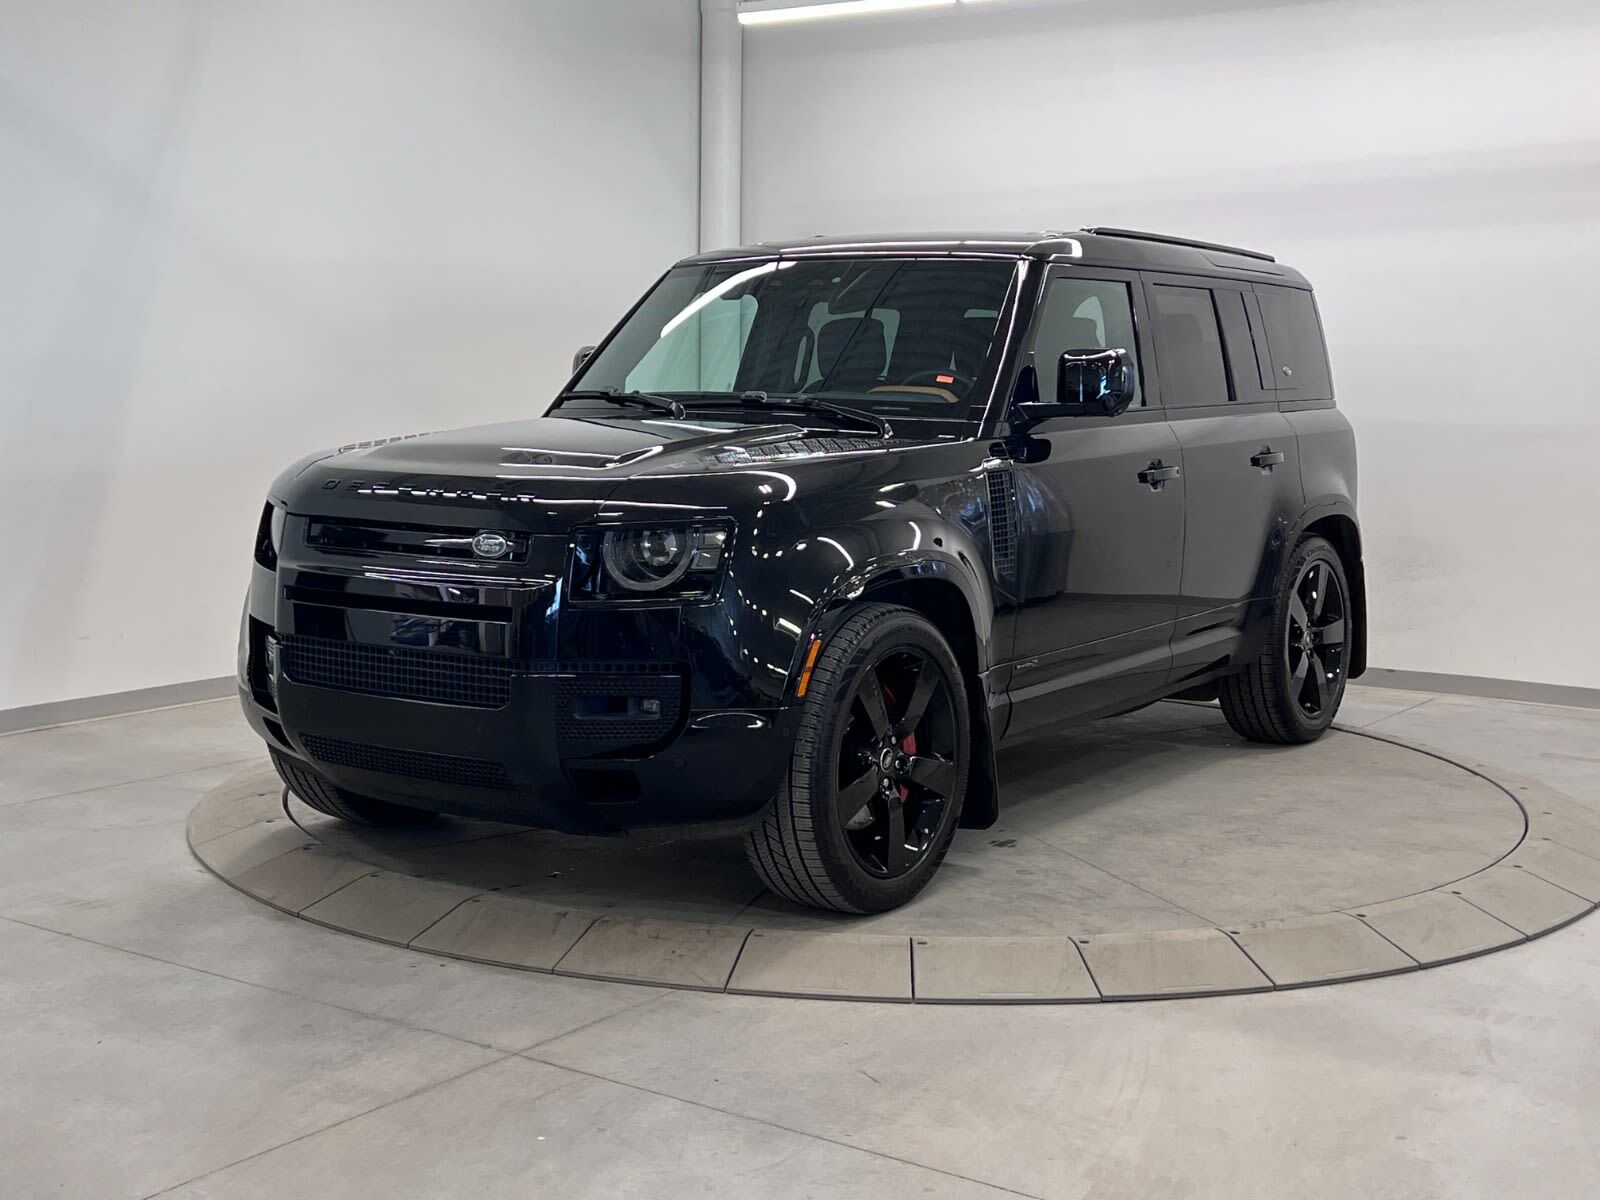 2022 Land Rover Defender CERTIFIED PRE OWNED RATES AS LOW AS 5.99%